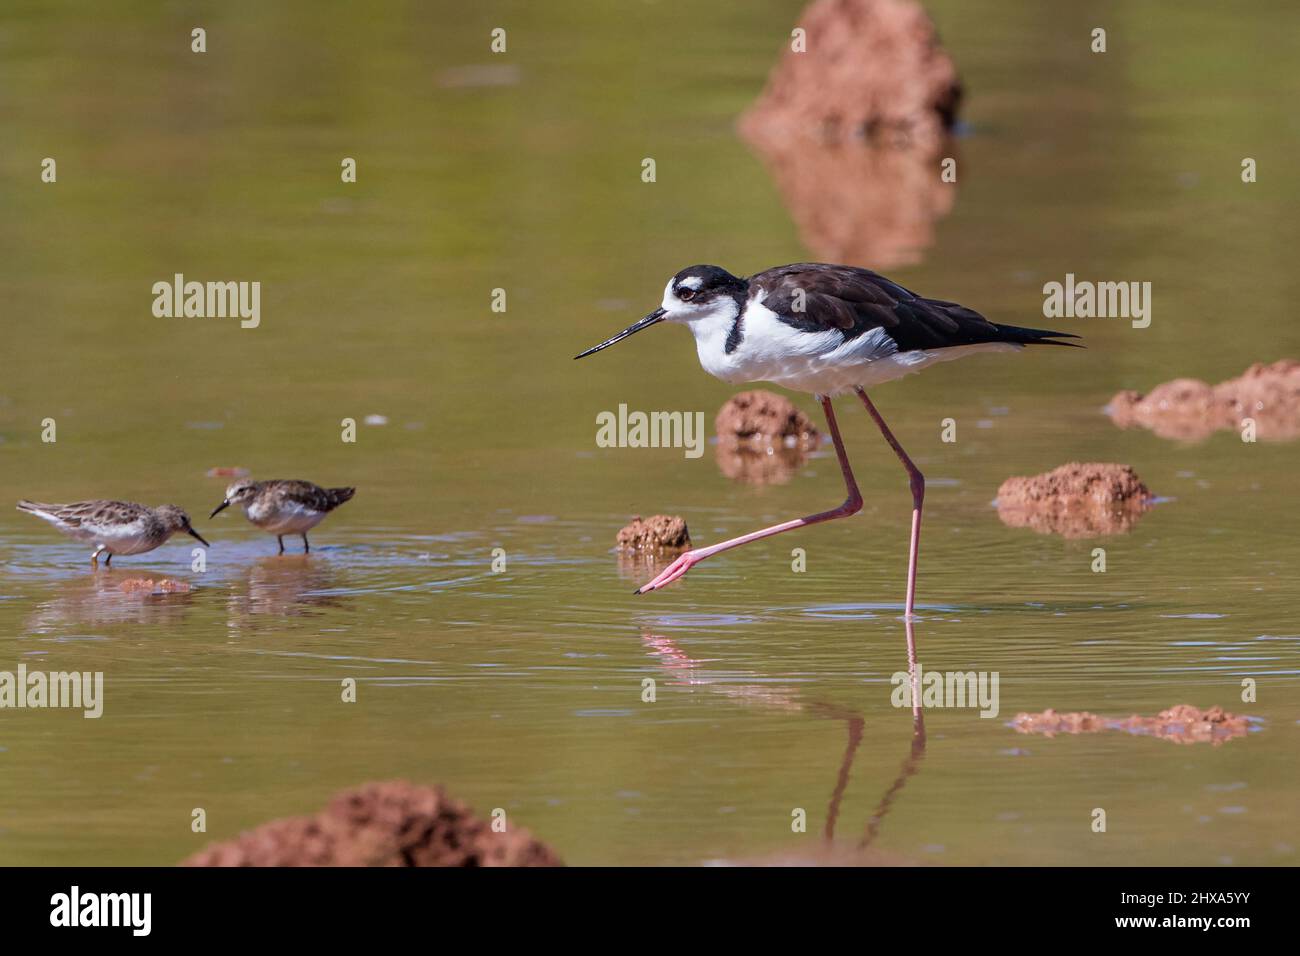 A Black-necked Stilt walking through the shallow waters of the mudflats in a Riparian habitat with a tucked in neck. Stock Photo